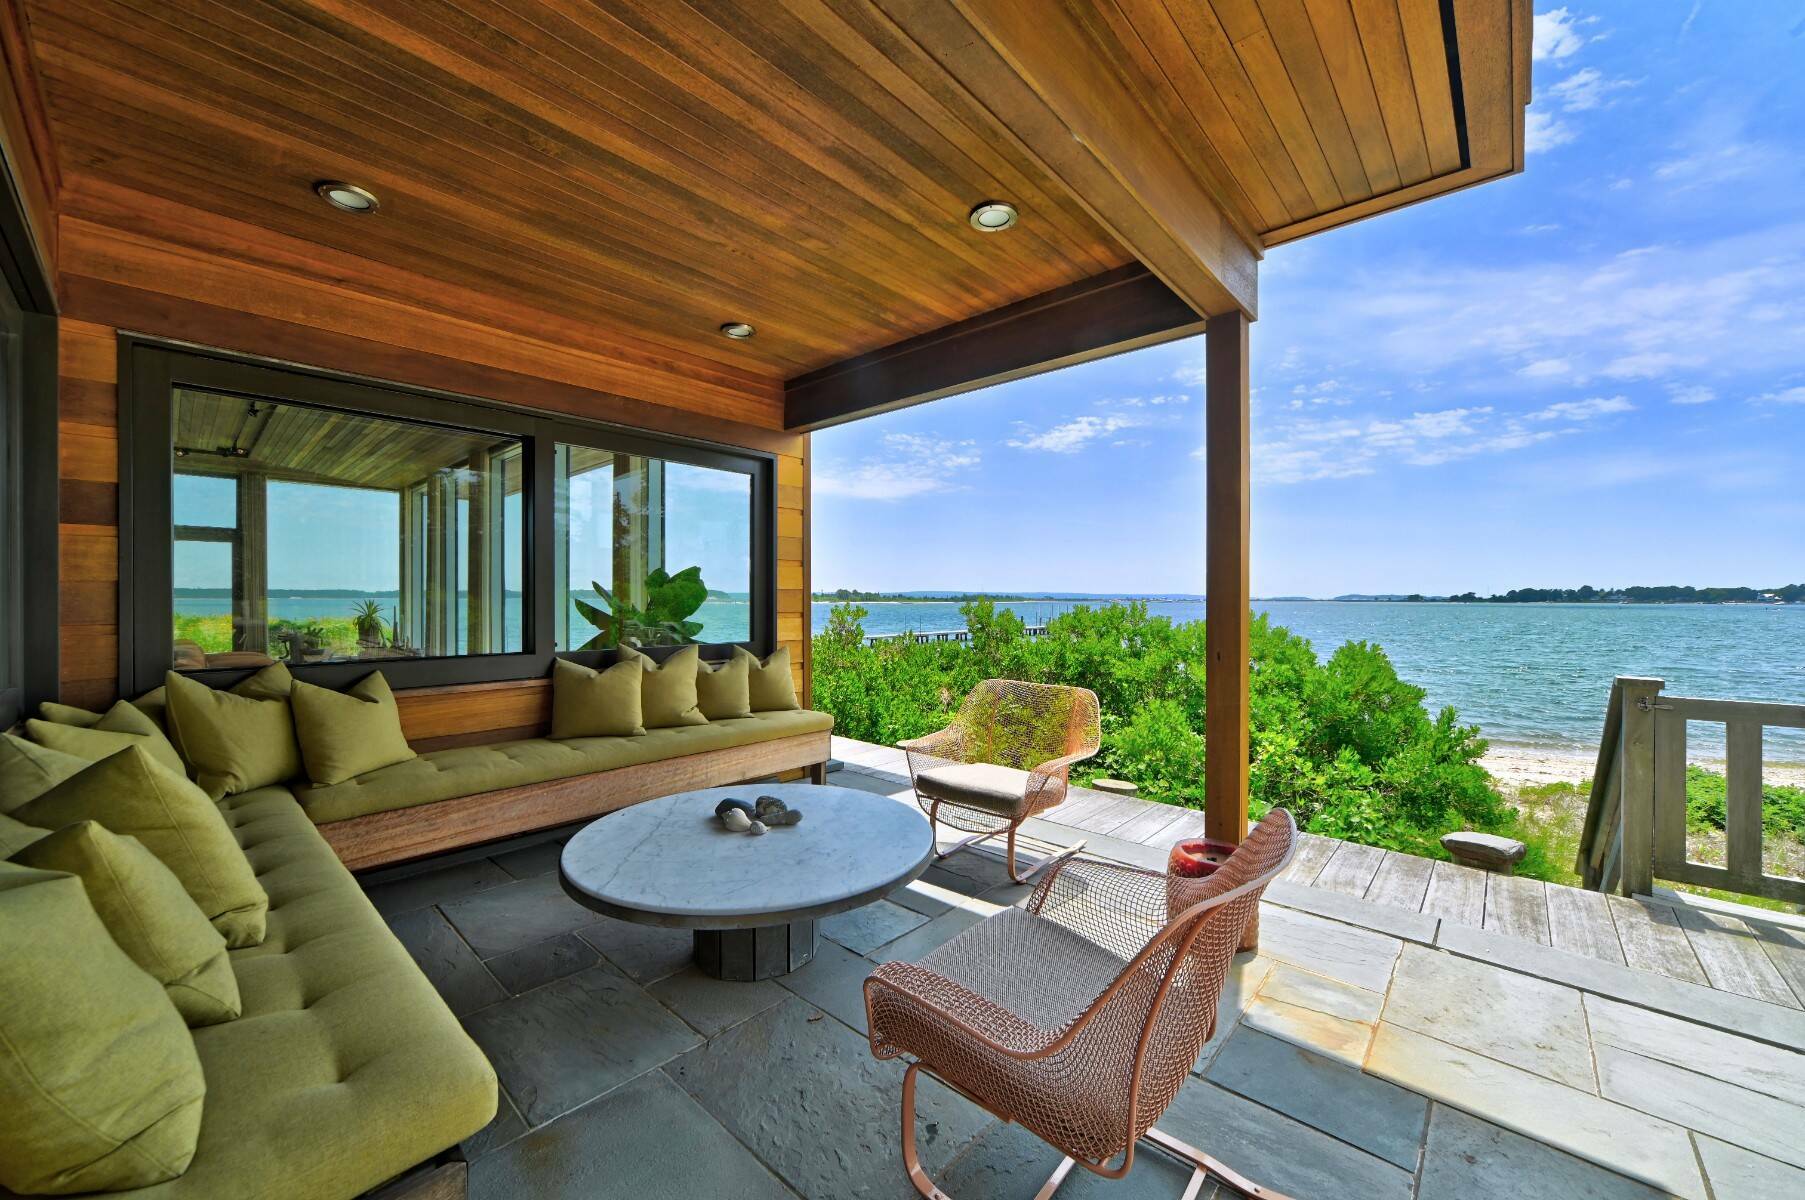 2 Charlie's Lane, Shelter Island. CHRIS FOSTER FOR SOTHEBY'S INTERNATIONAL REALTY